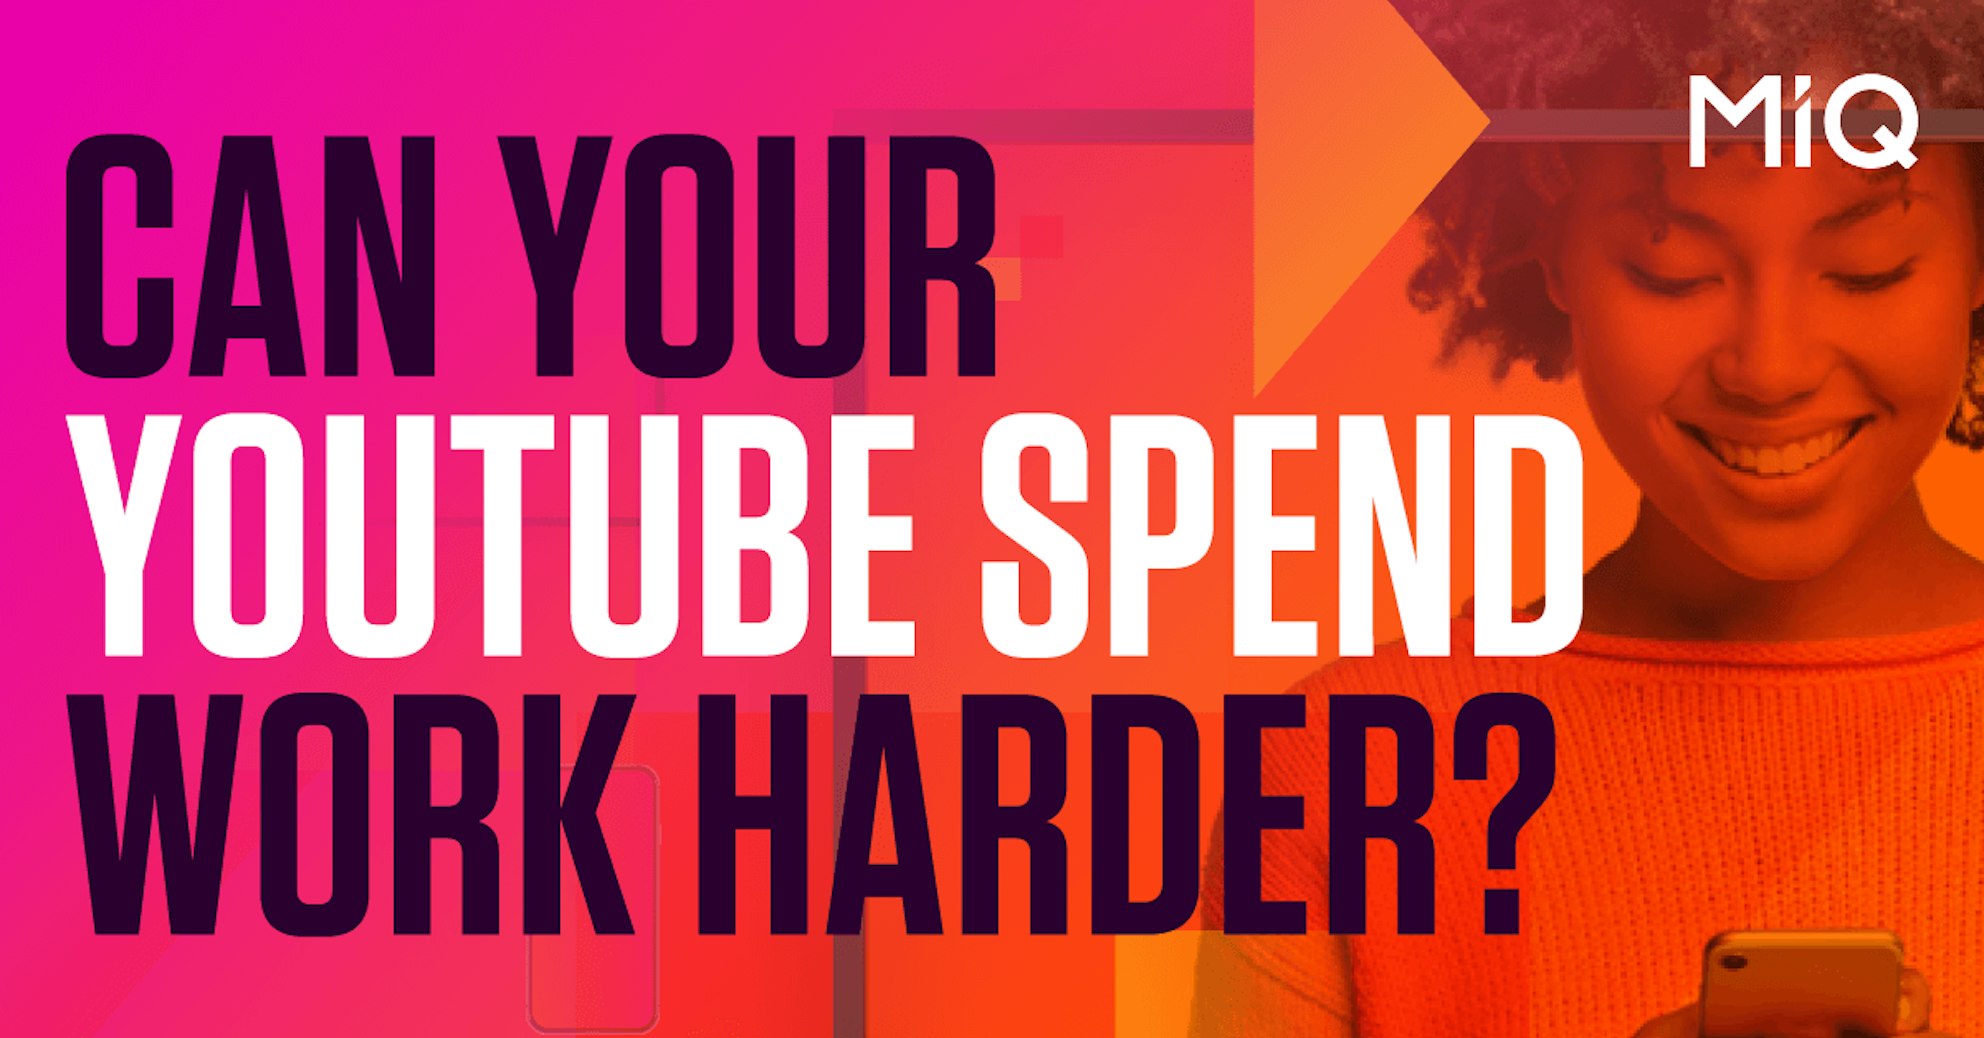 Can your YouTube spend work harder?